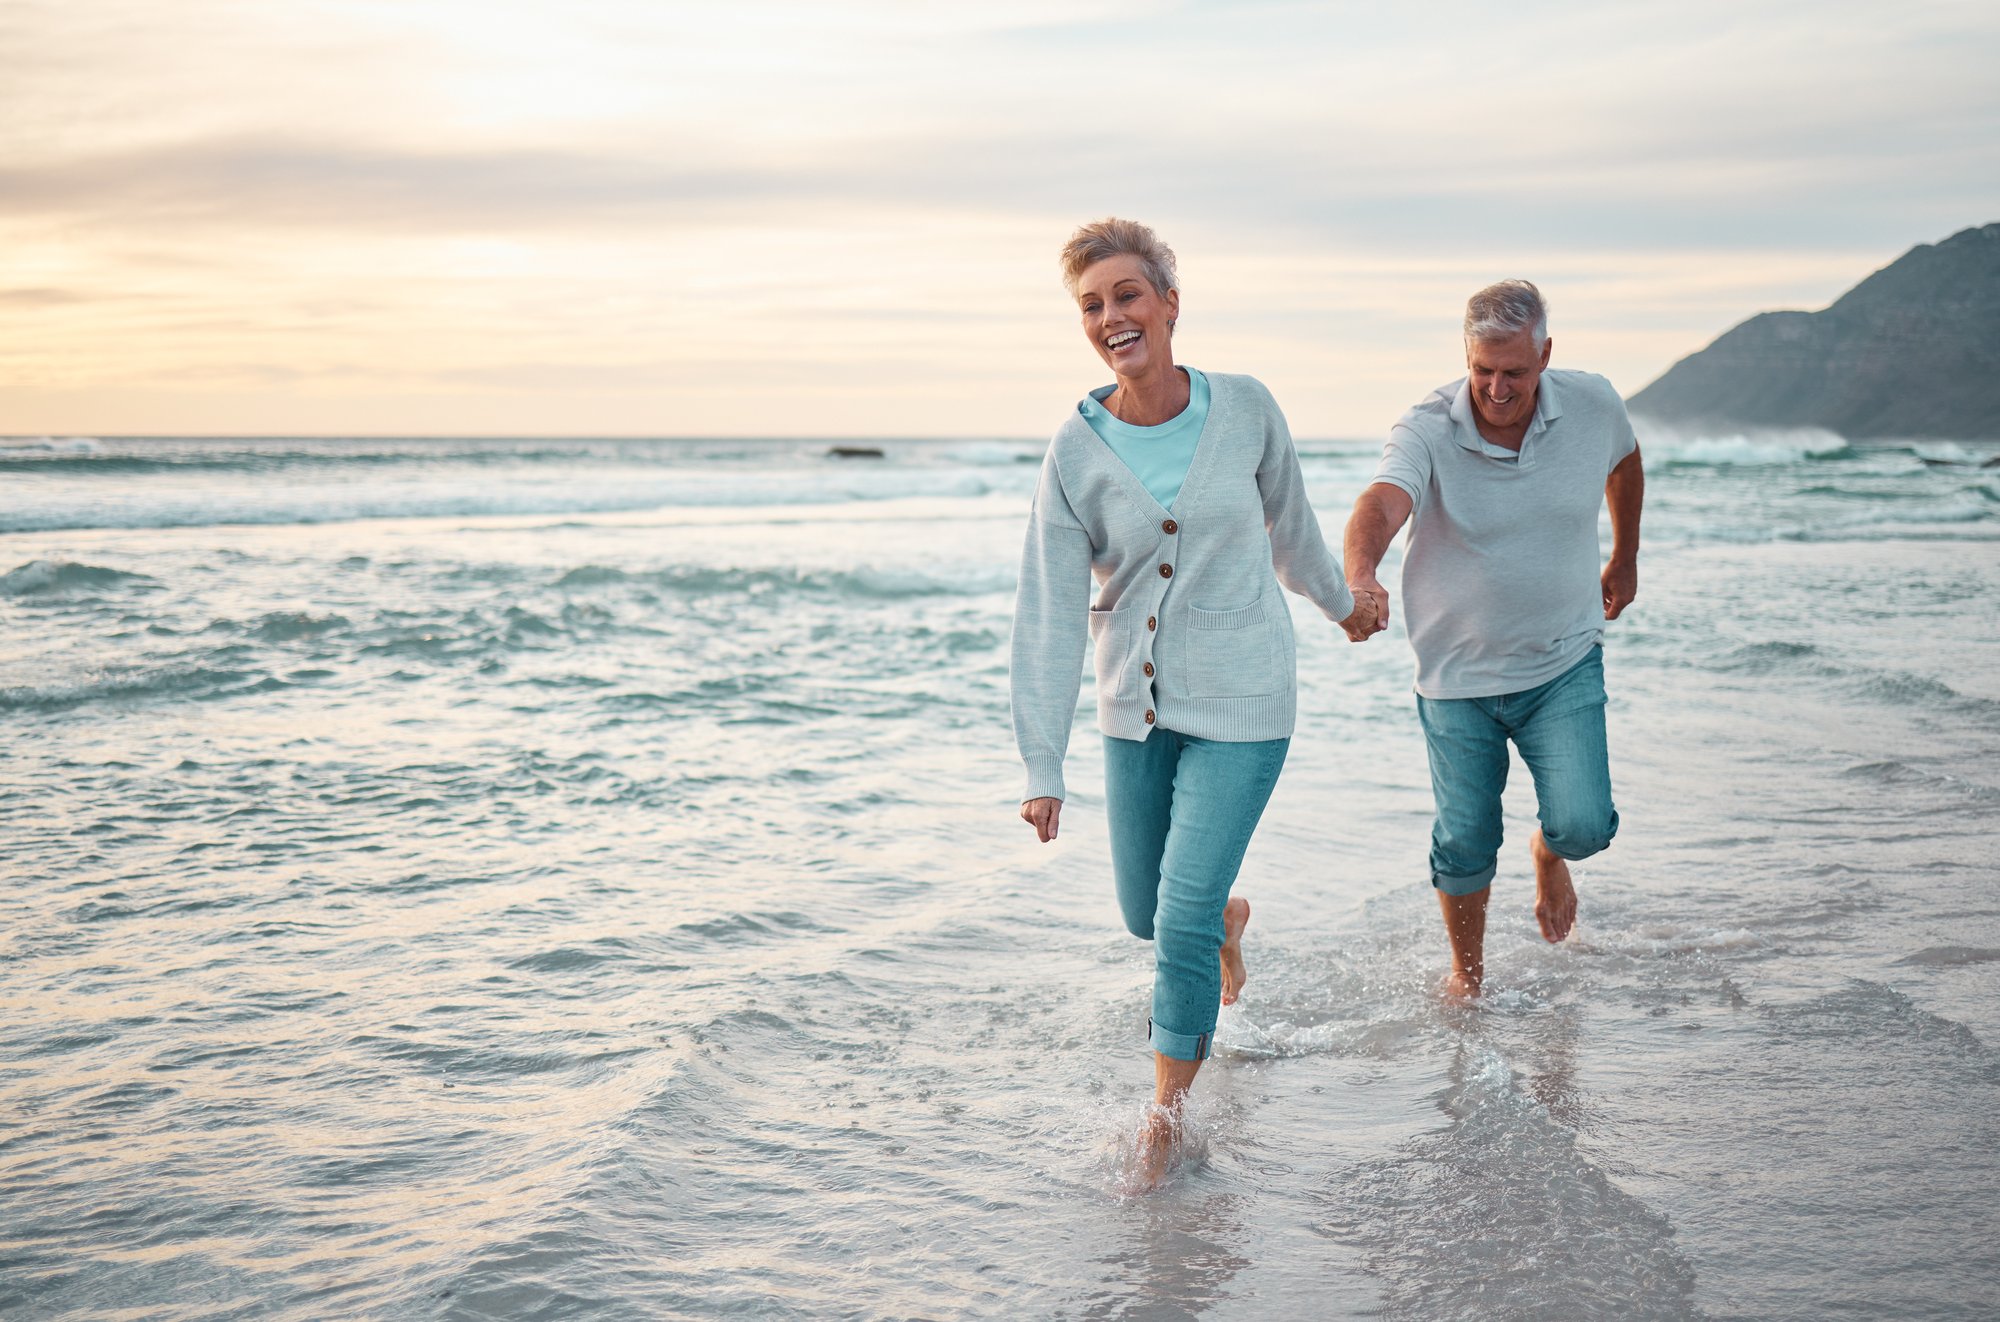 beach-walking-senior-couple-holding-hands-support-love-care-with-outdoor-wellness-retirement-holiday-lifestyle-with-sunset-sky-elderly-people-running-together-sea-ocean-water